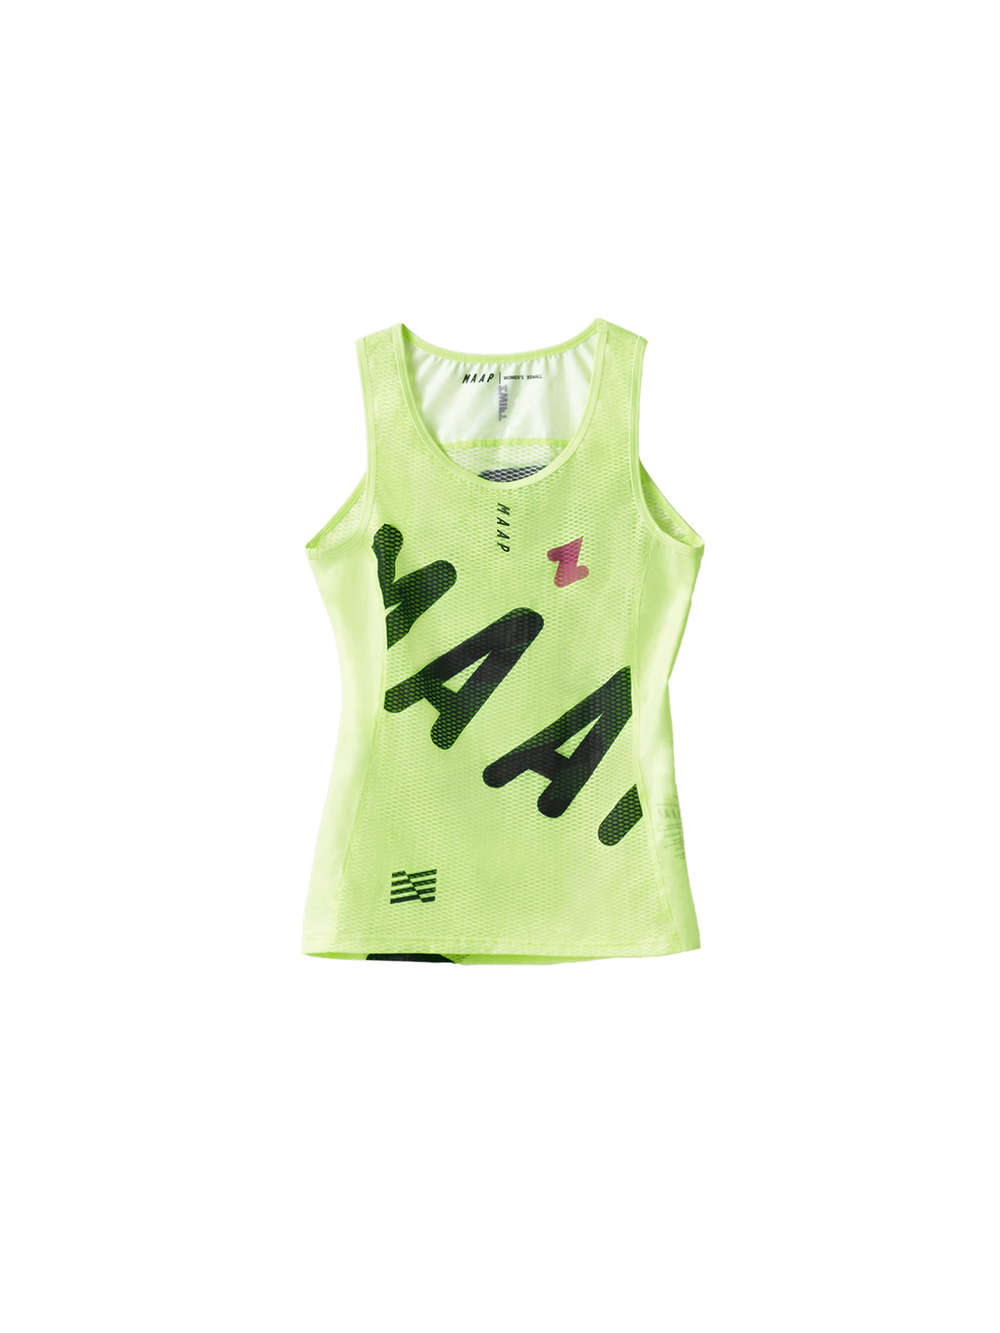 Product Image for MAAP x ZWIFT 2022 Women's Base Layer Vest